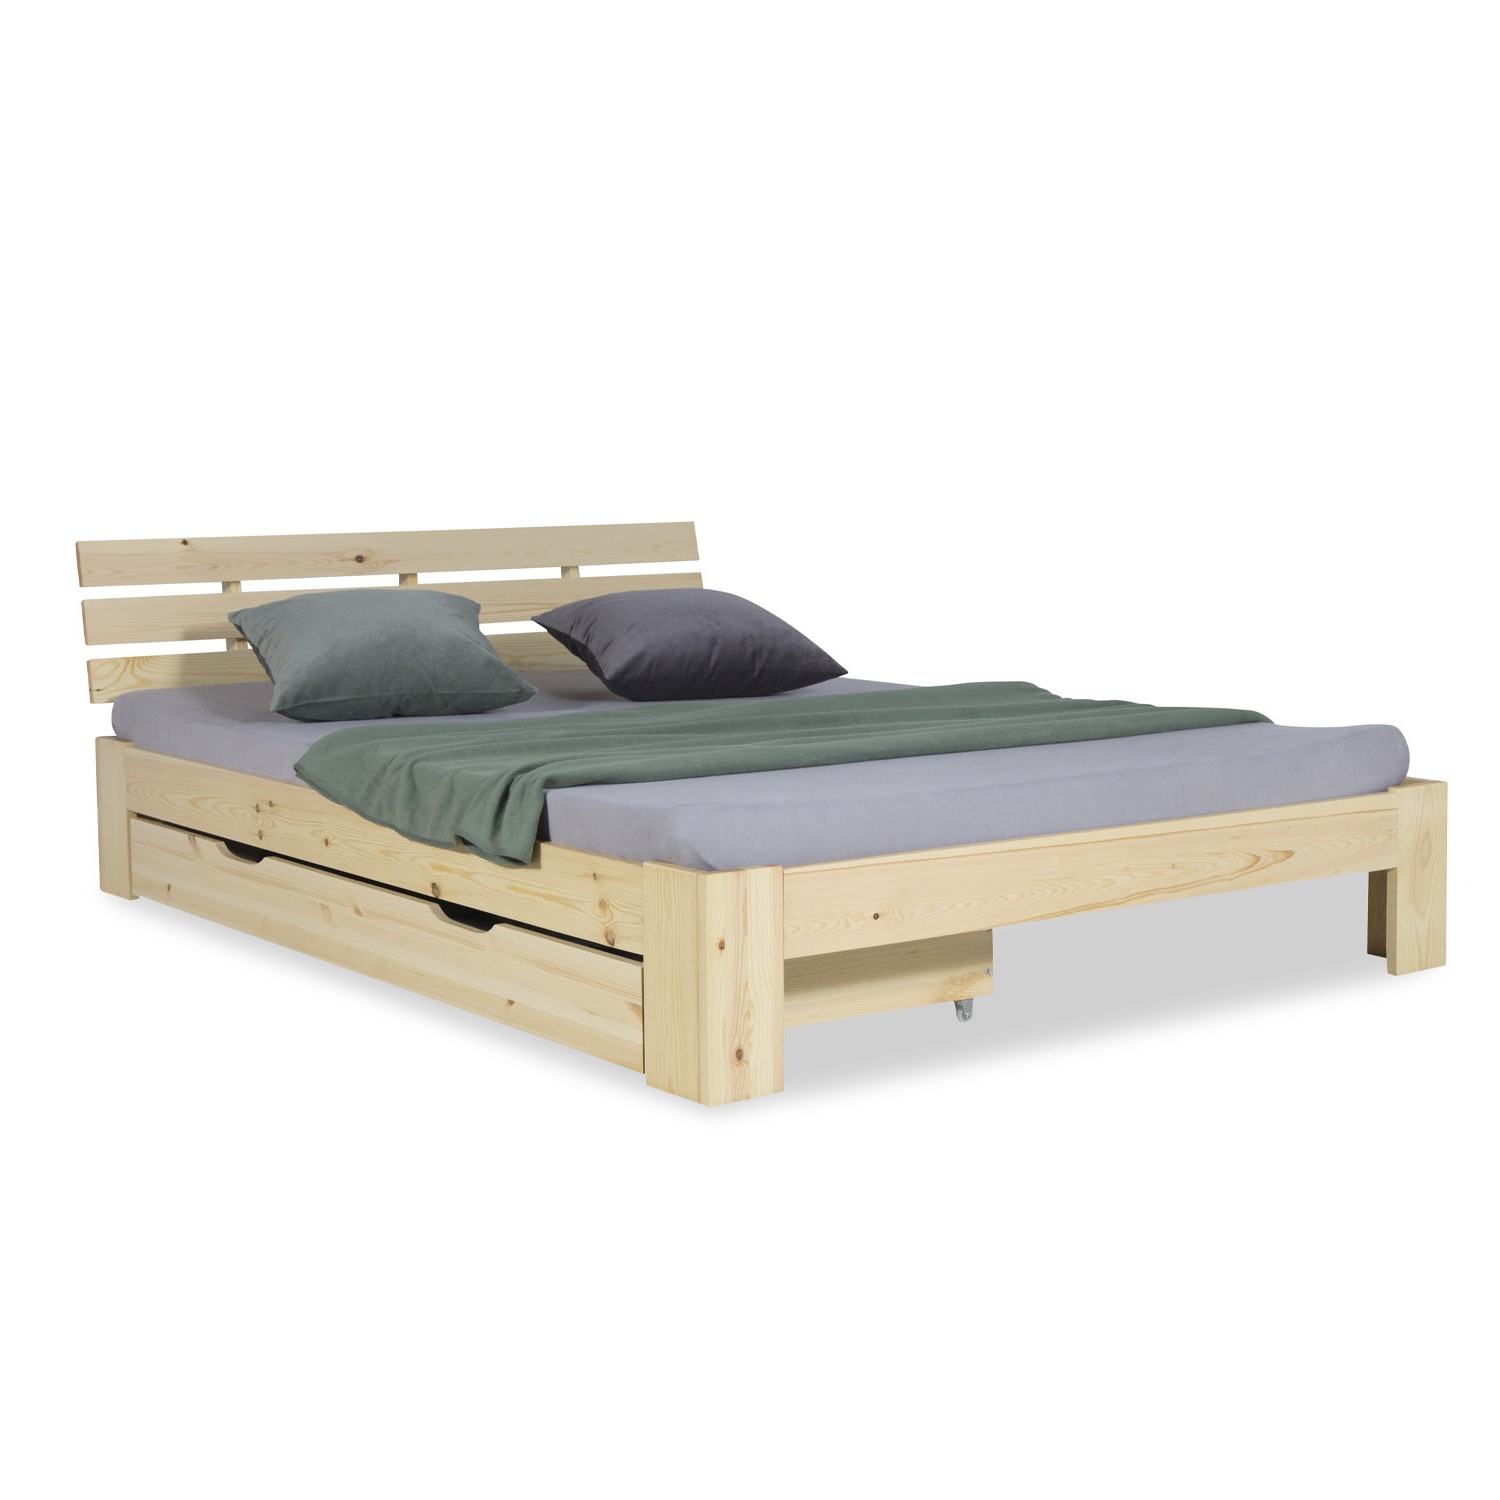 Double Bed 140x200 cm with Bed Drawer Slatted Frame Bed Natural Bed Frame Wooden Bed